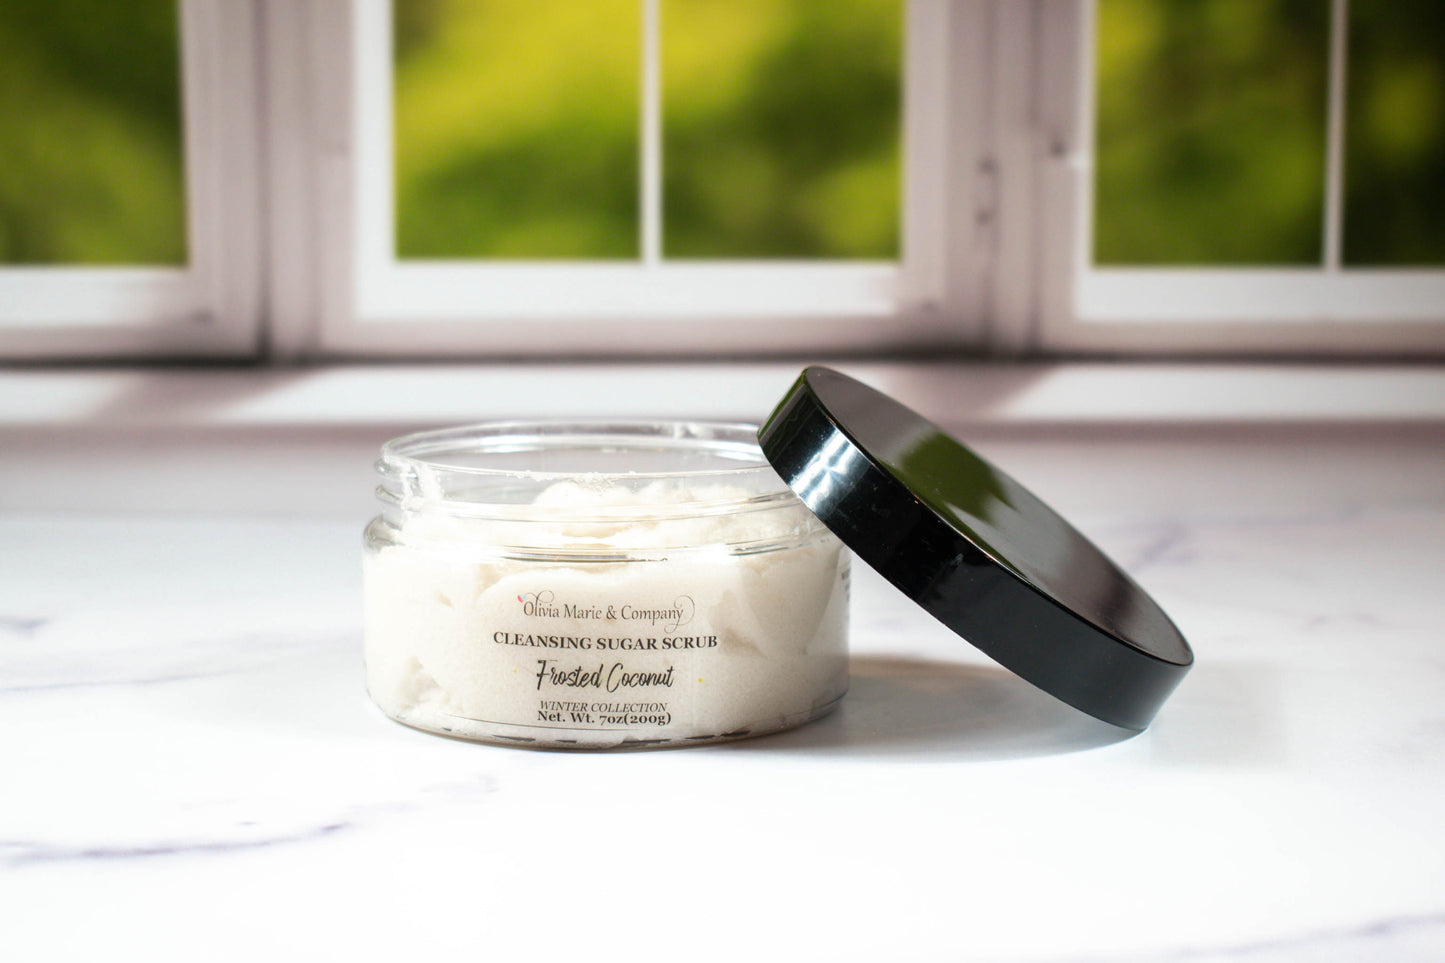 Frosted Coconut Cleansing Sugar Scrub